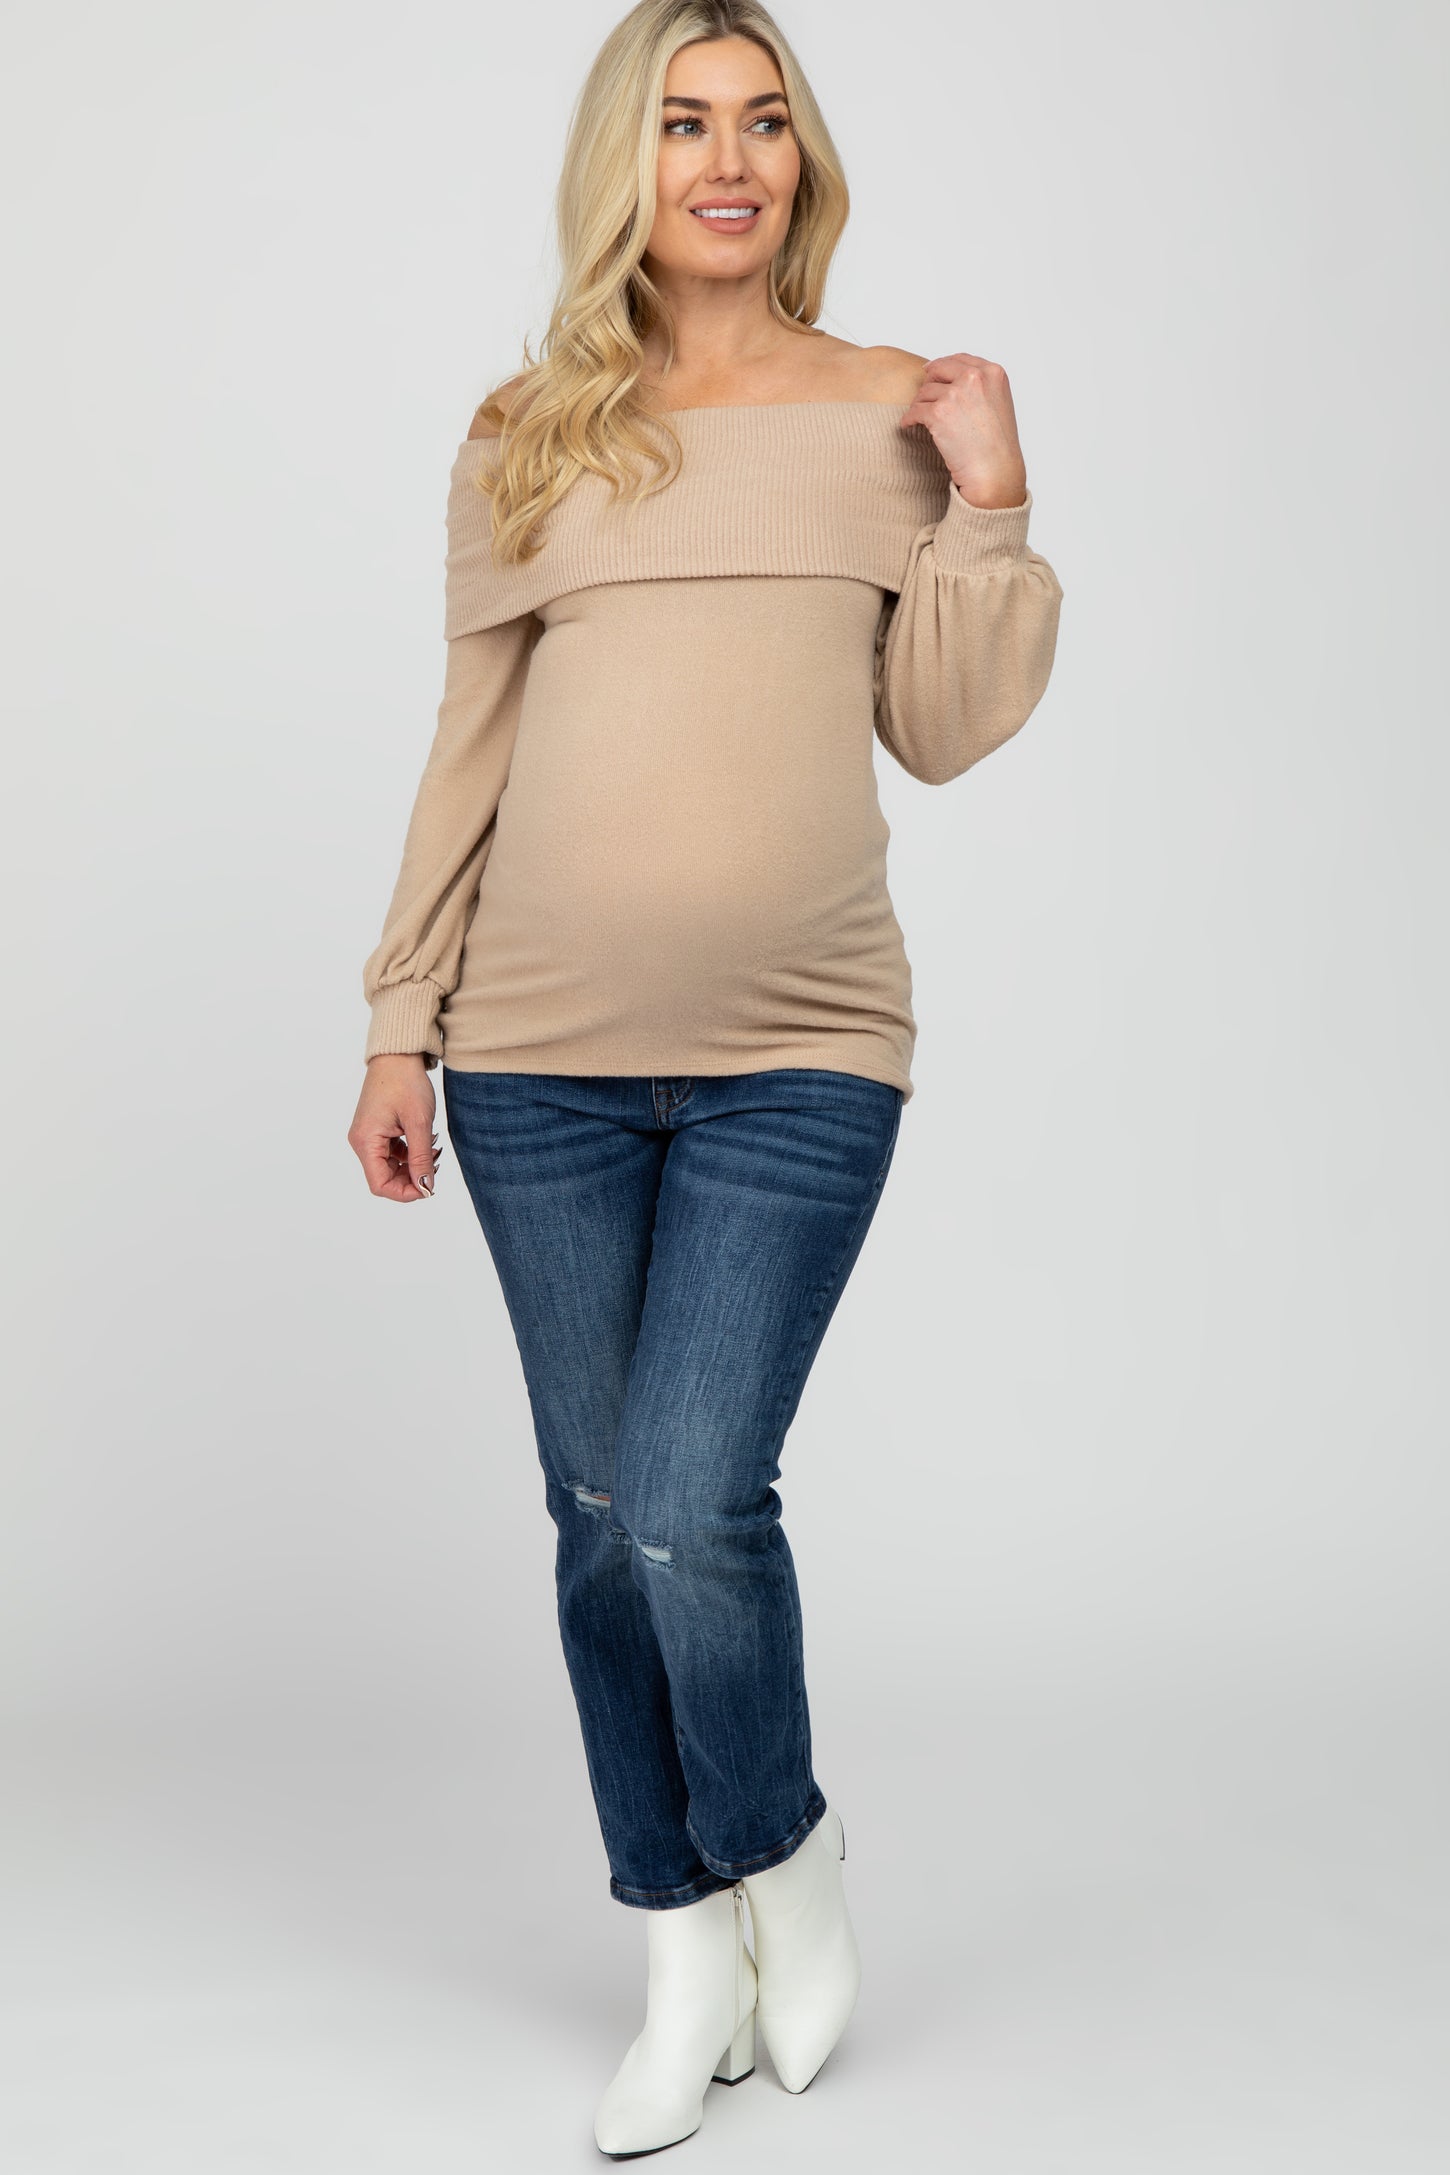 Taupe Soft Brushed Off Shoulder Fitted Maternity Top